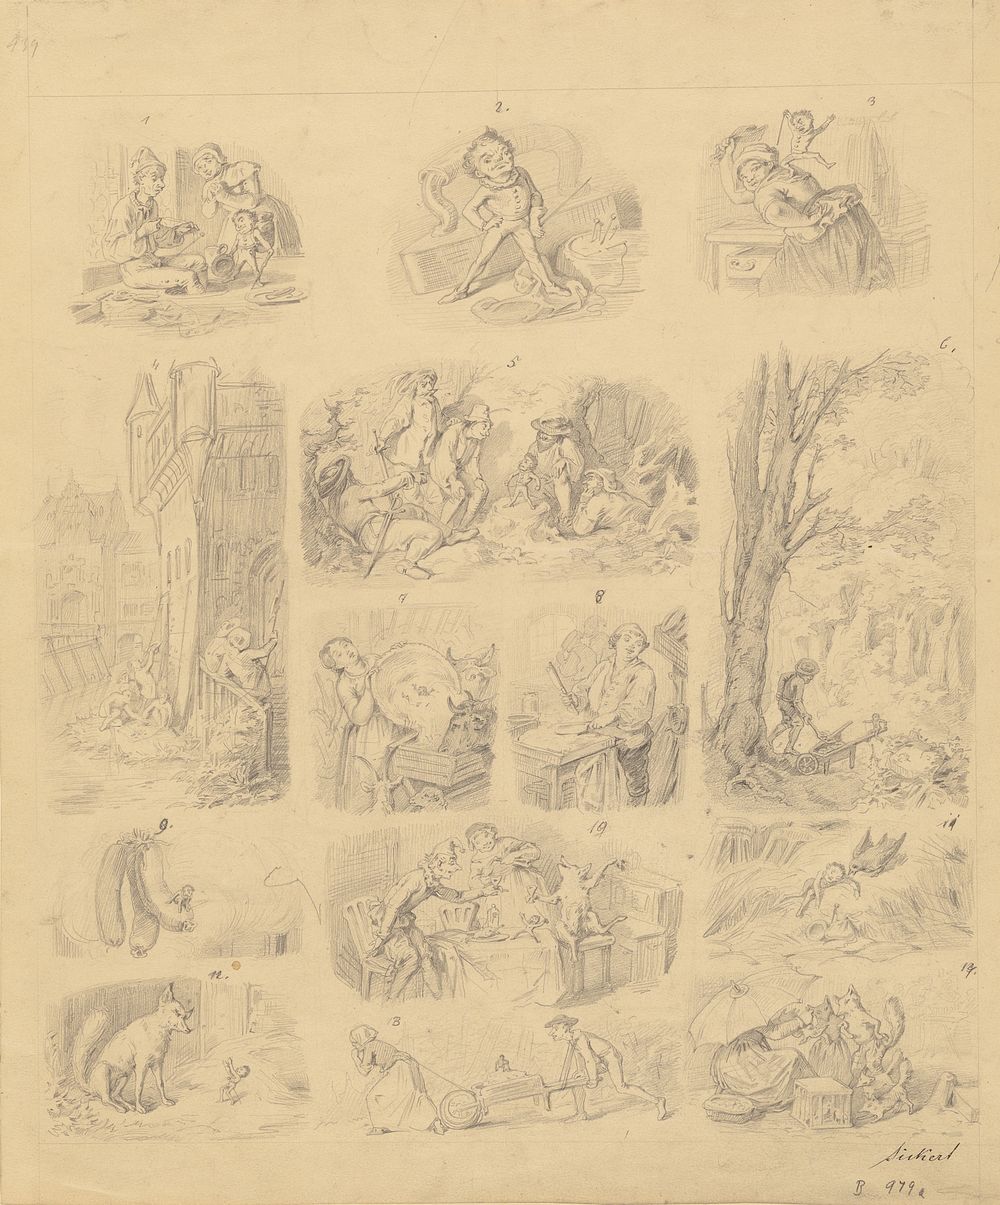 Fourteen Scenes Related to the Tale of Tom Thumb by Oswald Adalbert Sickert